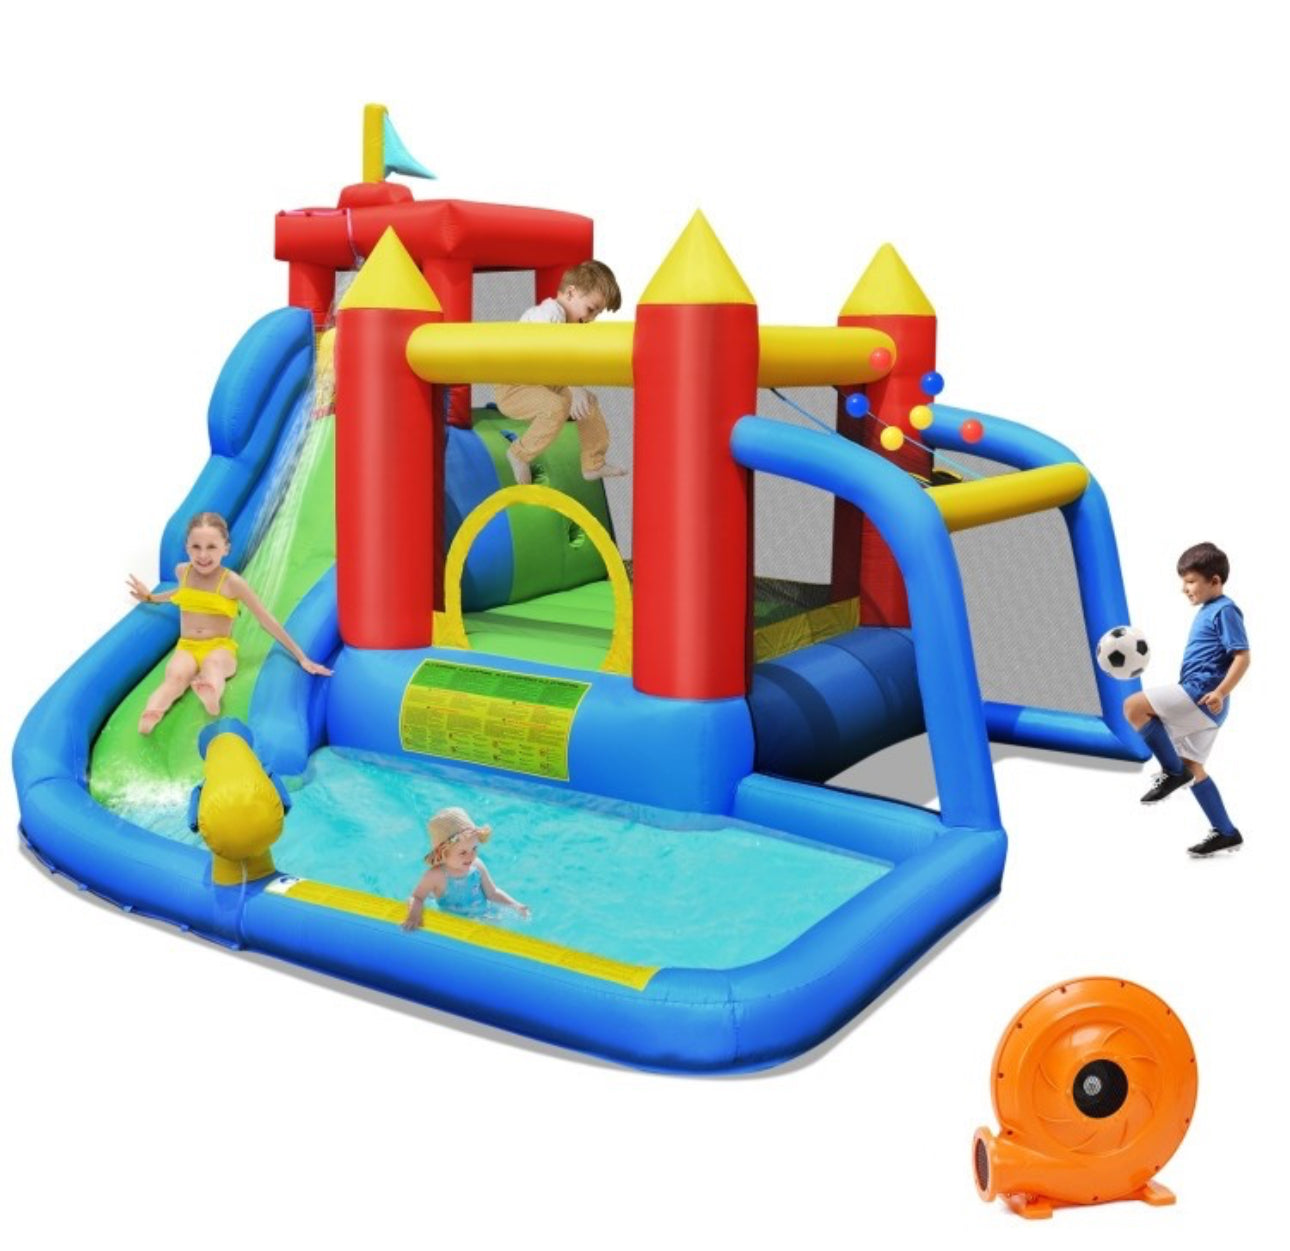 Super Cool & Fun 7-in-1 Inflatable Bouncy House Splash Pool | Water Slide | Jump Area | Climb Wall | Ball Shoot | Soccer | Water Cannon | W 740W Blower